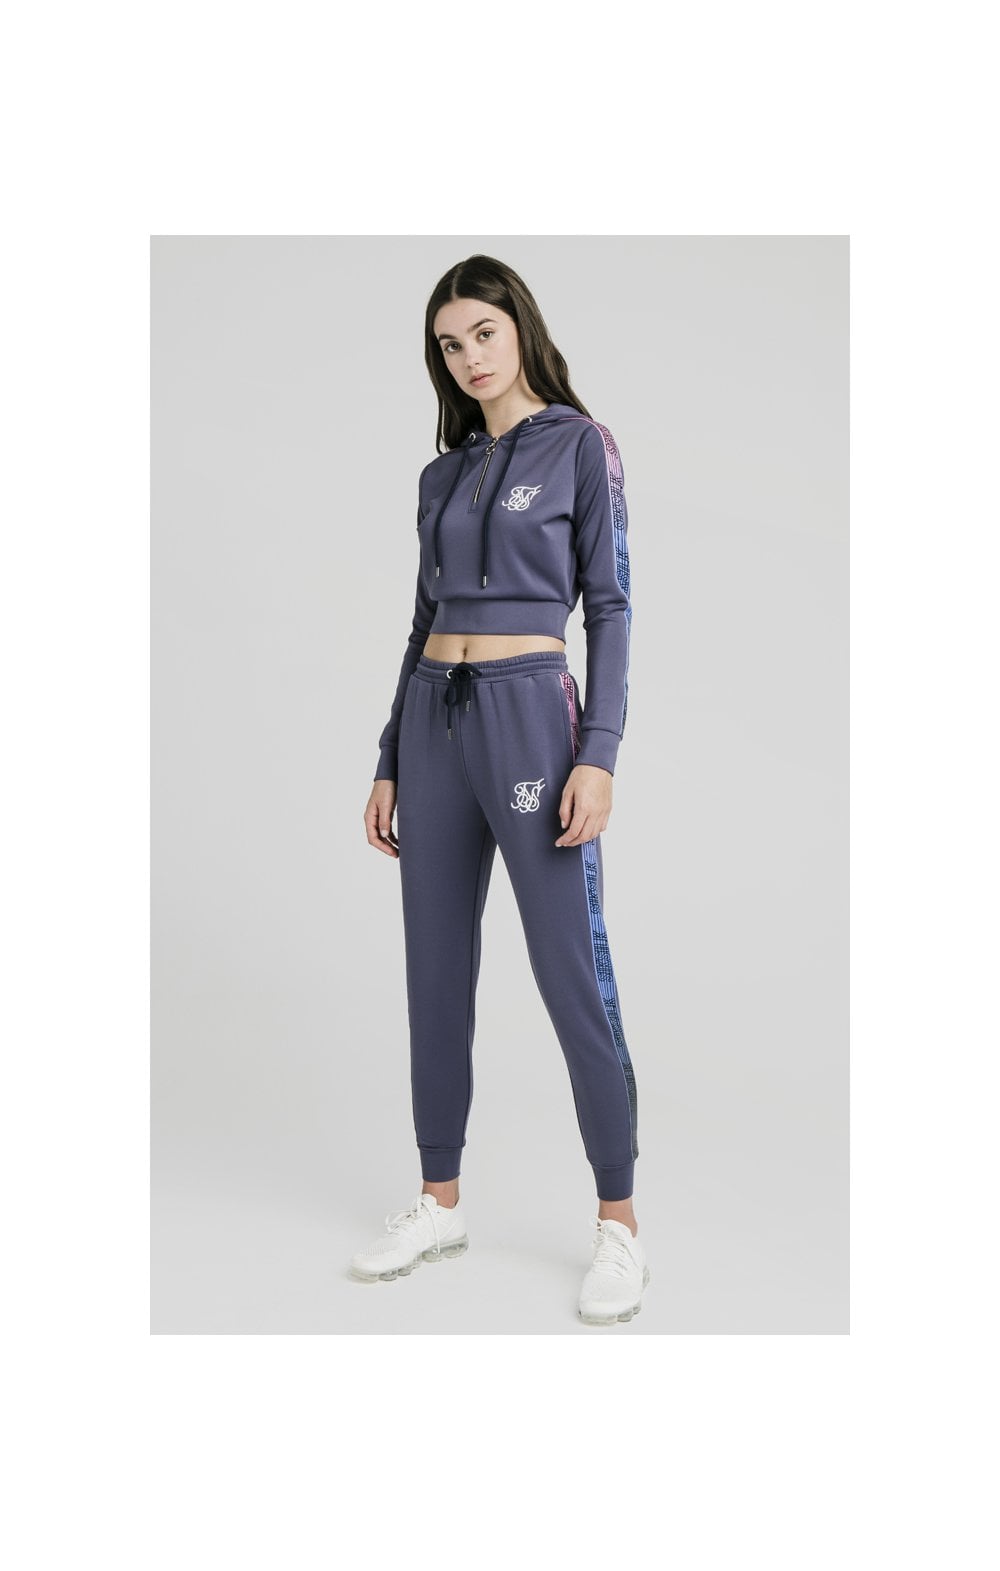 Load image into Gallery viewer, SikSilk Fade Runner Track Top - Night Shadow (5)